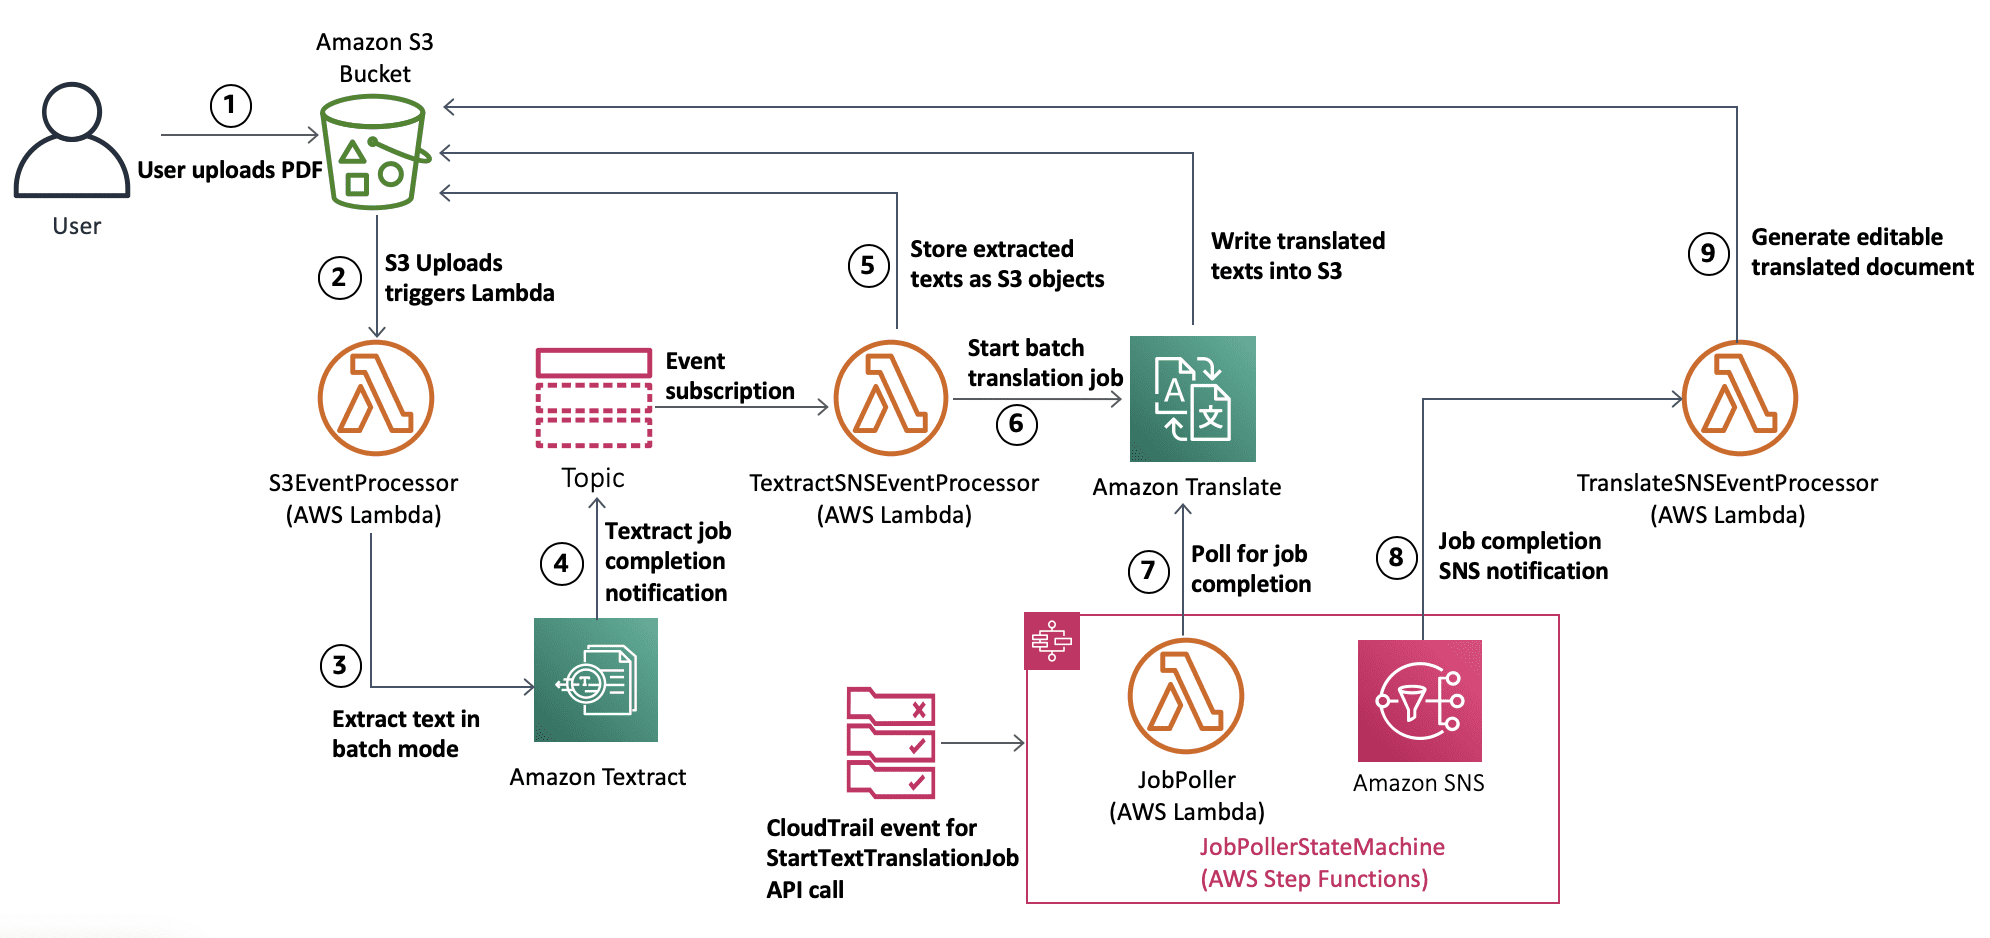 Architecture Diagram showing the workflow how uploading the PDF document to S3 bucket triggers the process of extracting text using Amazon textract and then translating it using Amazon Translate.